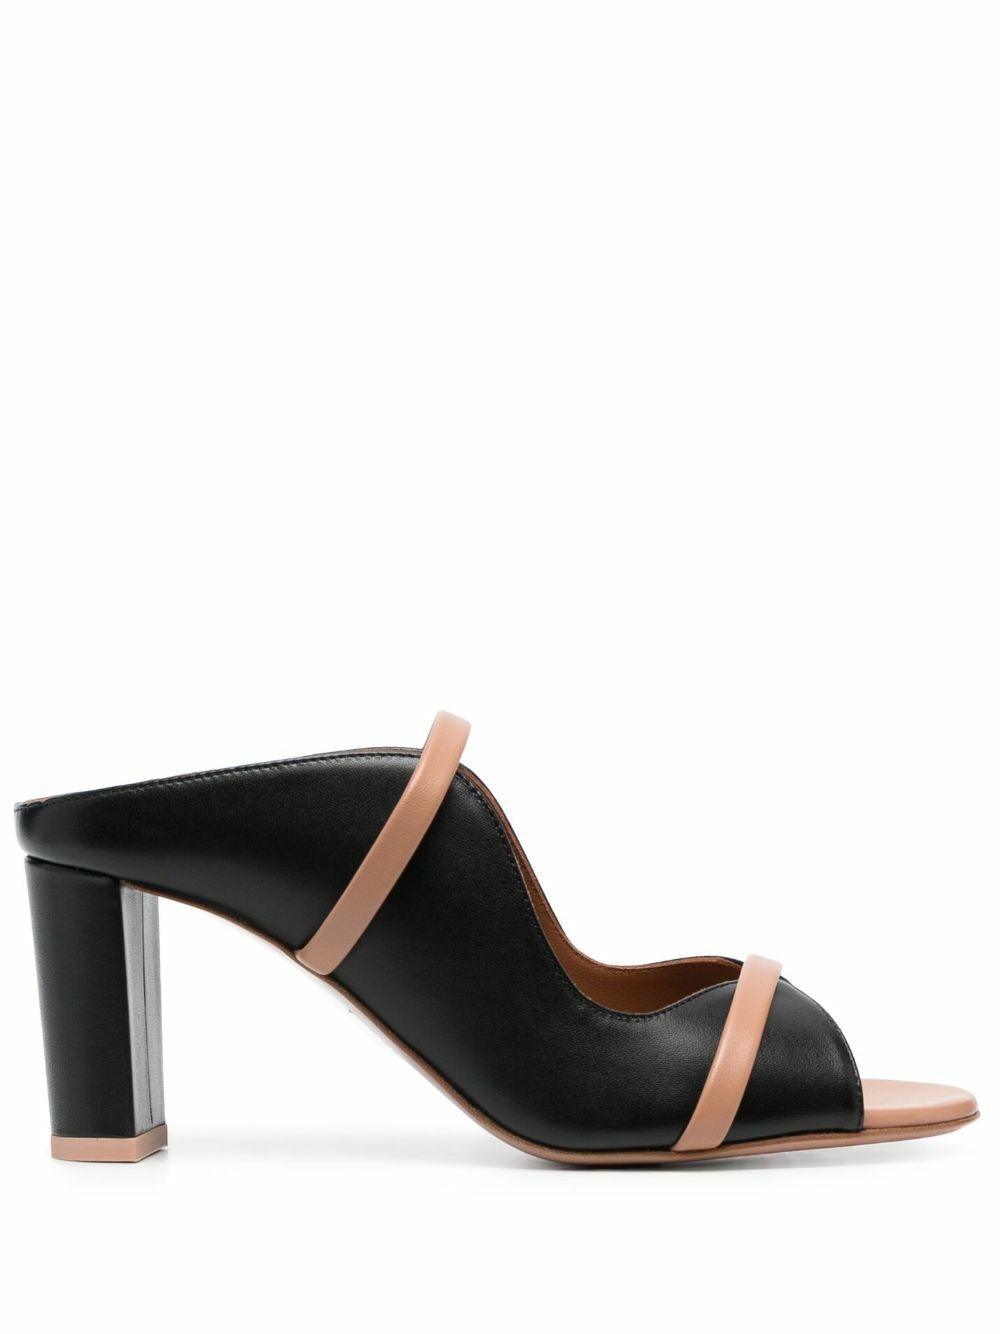 MALONE SOULIERS - Norah Leather Heel Mules Malone Souliers